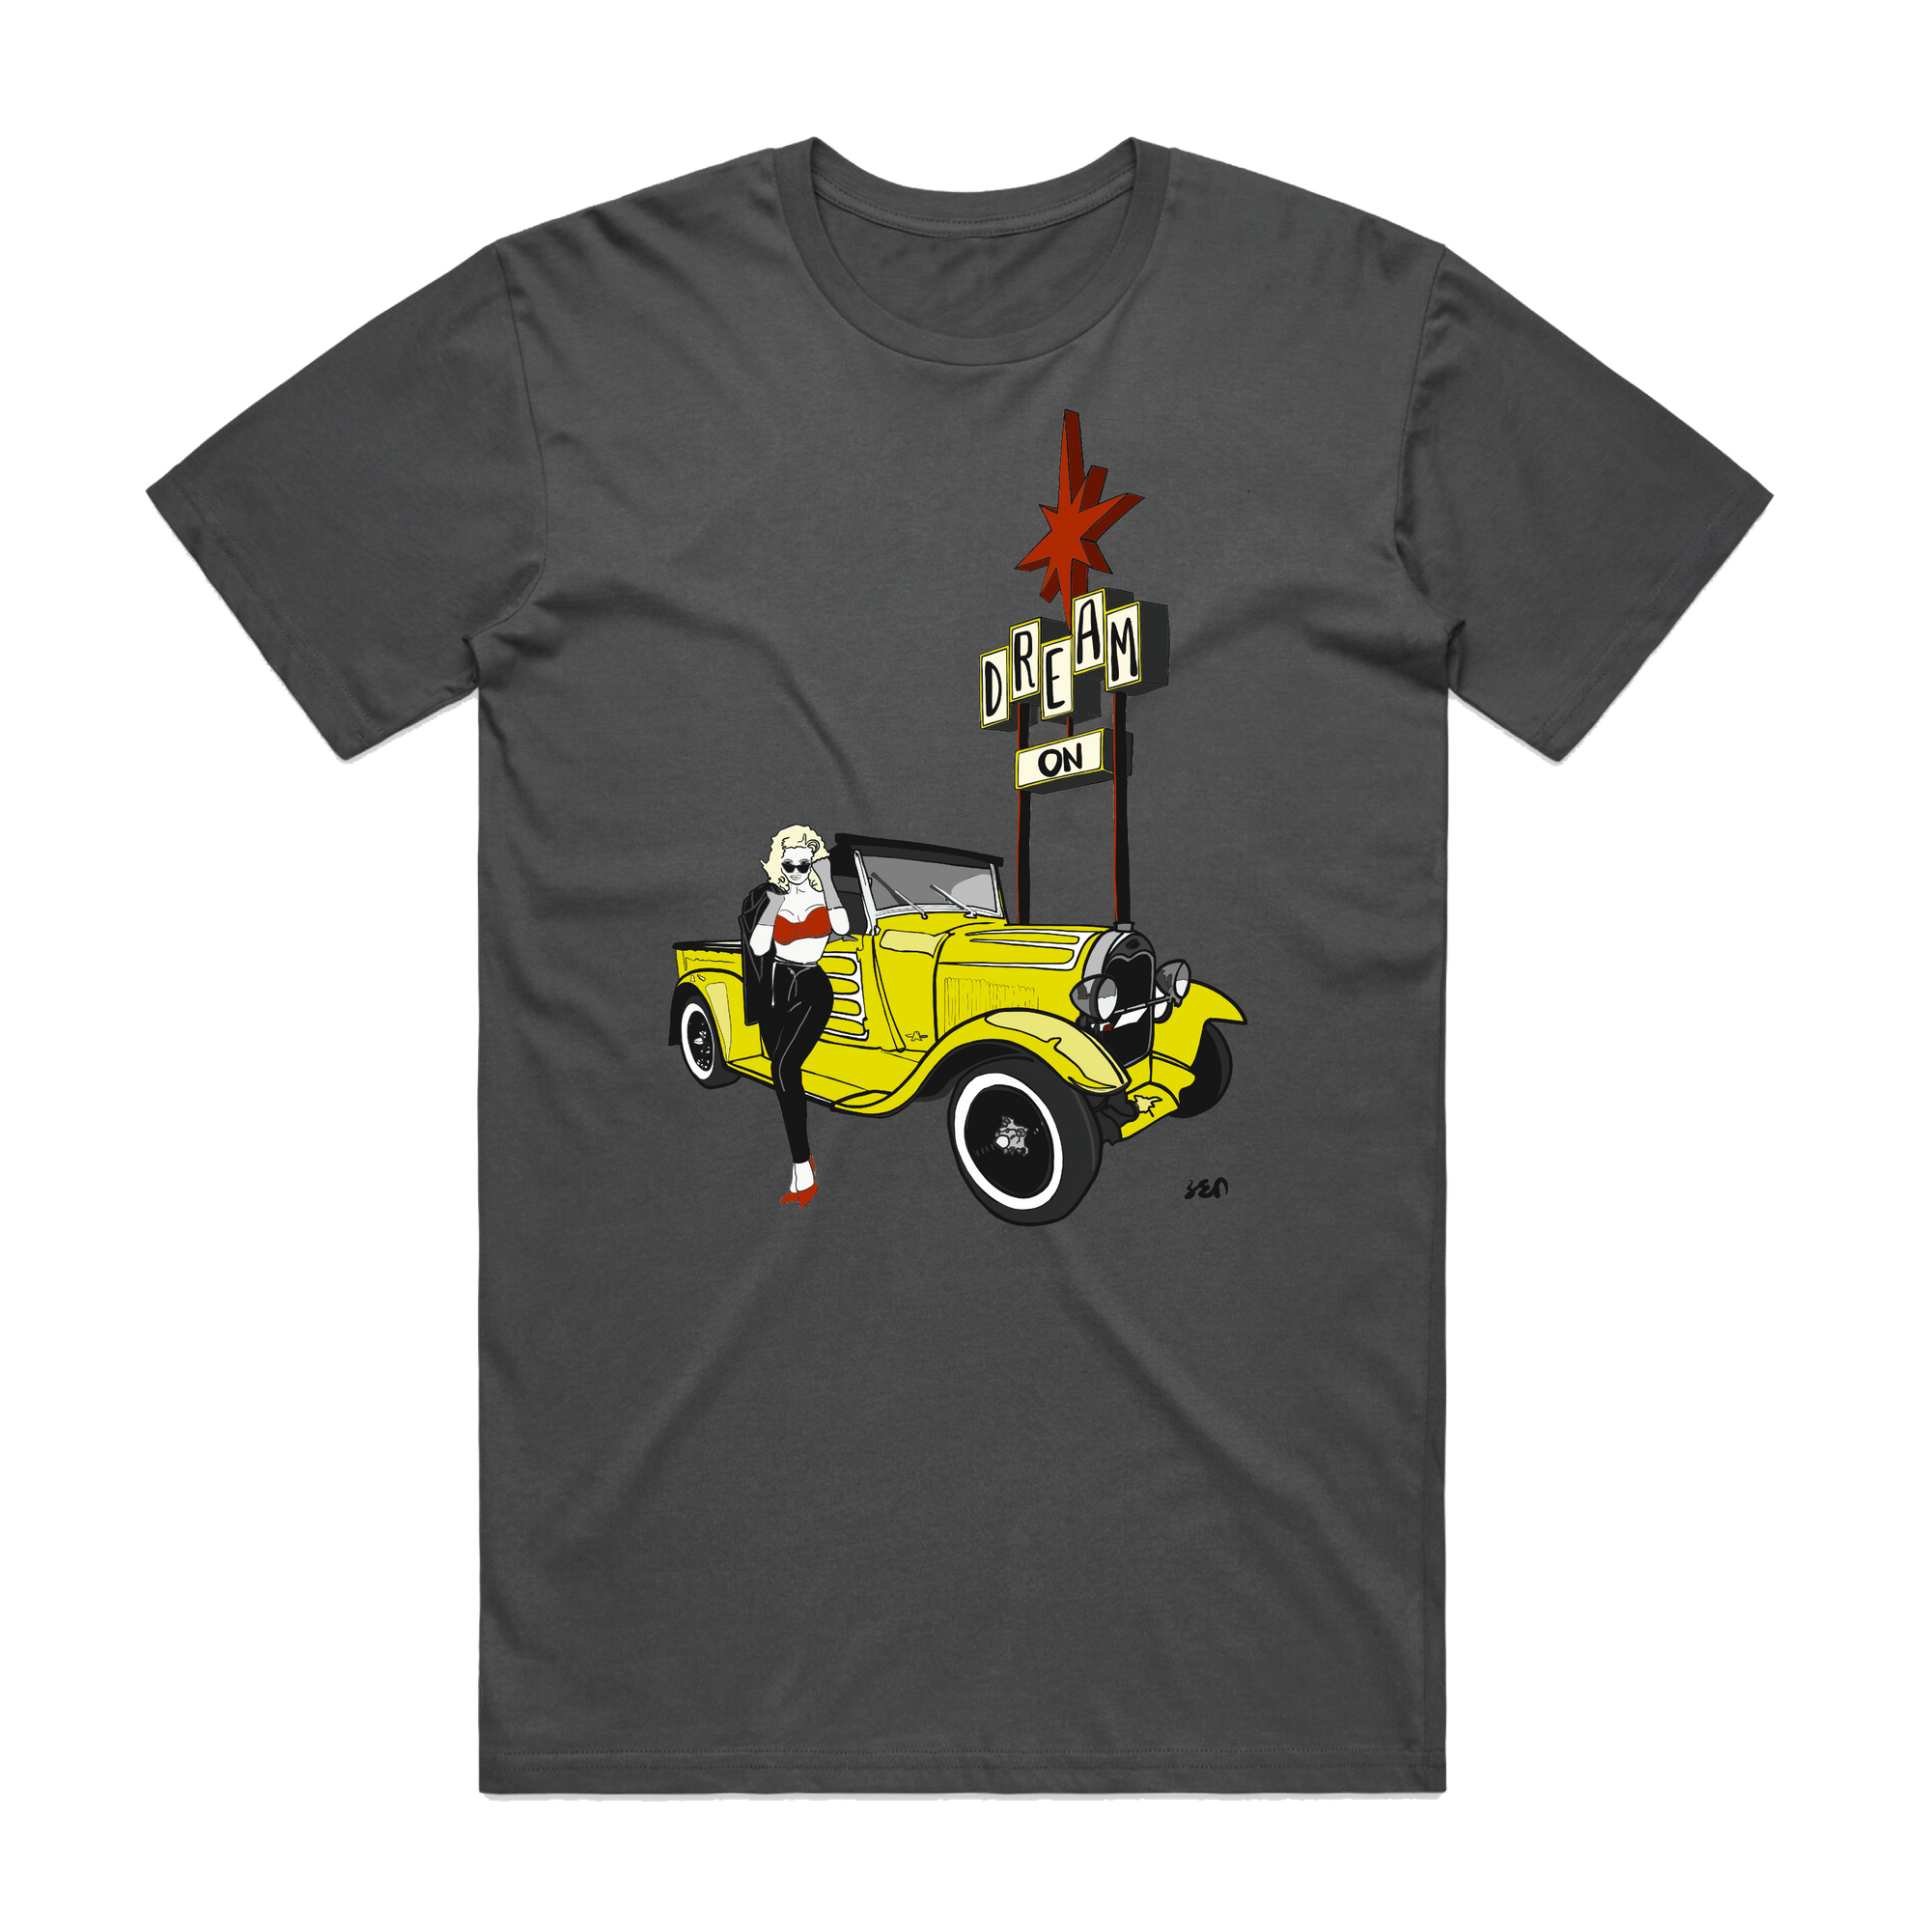 'DREAM ON ROADSTER' 28 FORD PICKUP PINUP SIGN MENS TEE